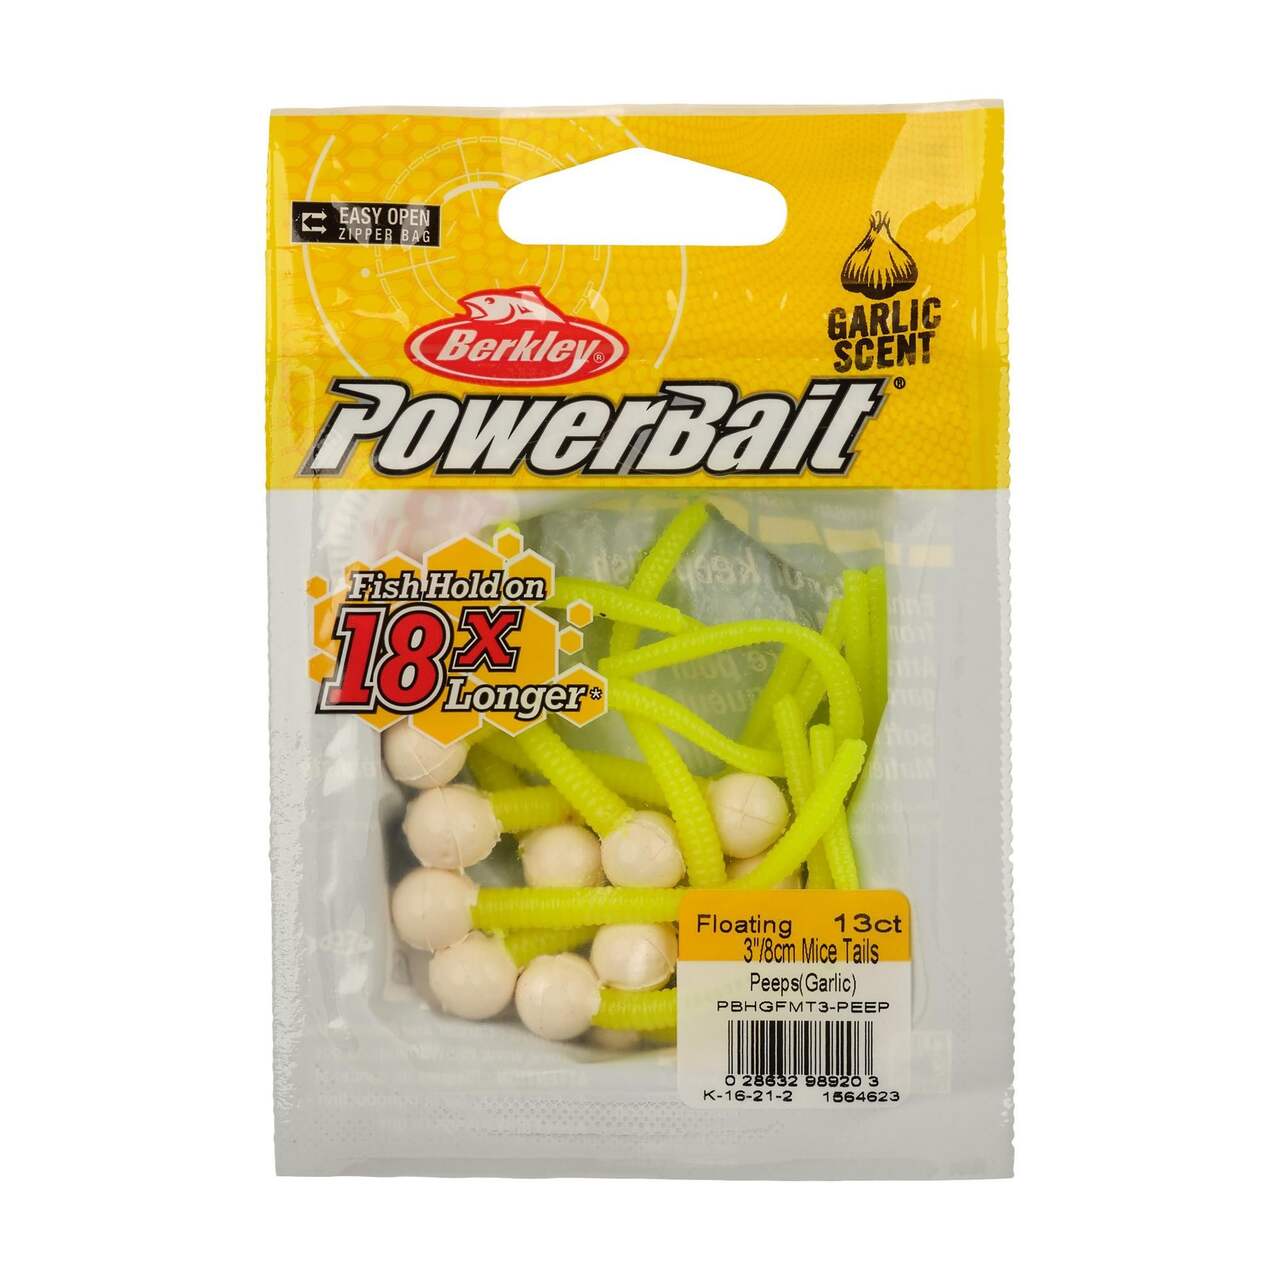 https://media-www.canadiantire.ca/product/playing/fishing/fishing-lures/0775411/powerbait-floating-mice-tails-garlic-3-peeps-b32fcb19-d2c9-419b-9167-c094b576690d-jpgrendition.jpg?imdensity=1&imwidth=1244&impolicy=mZoom